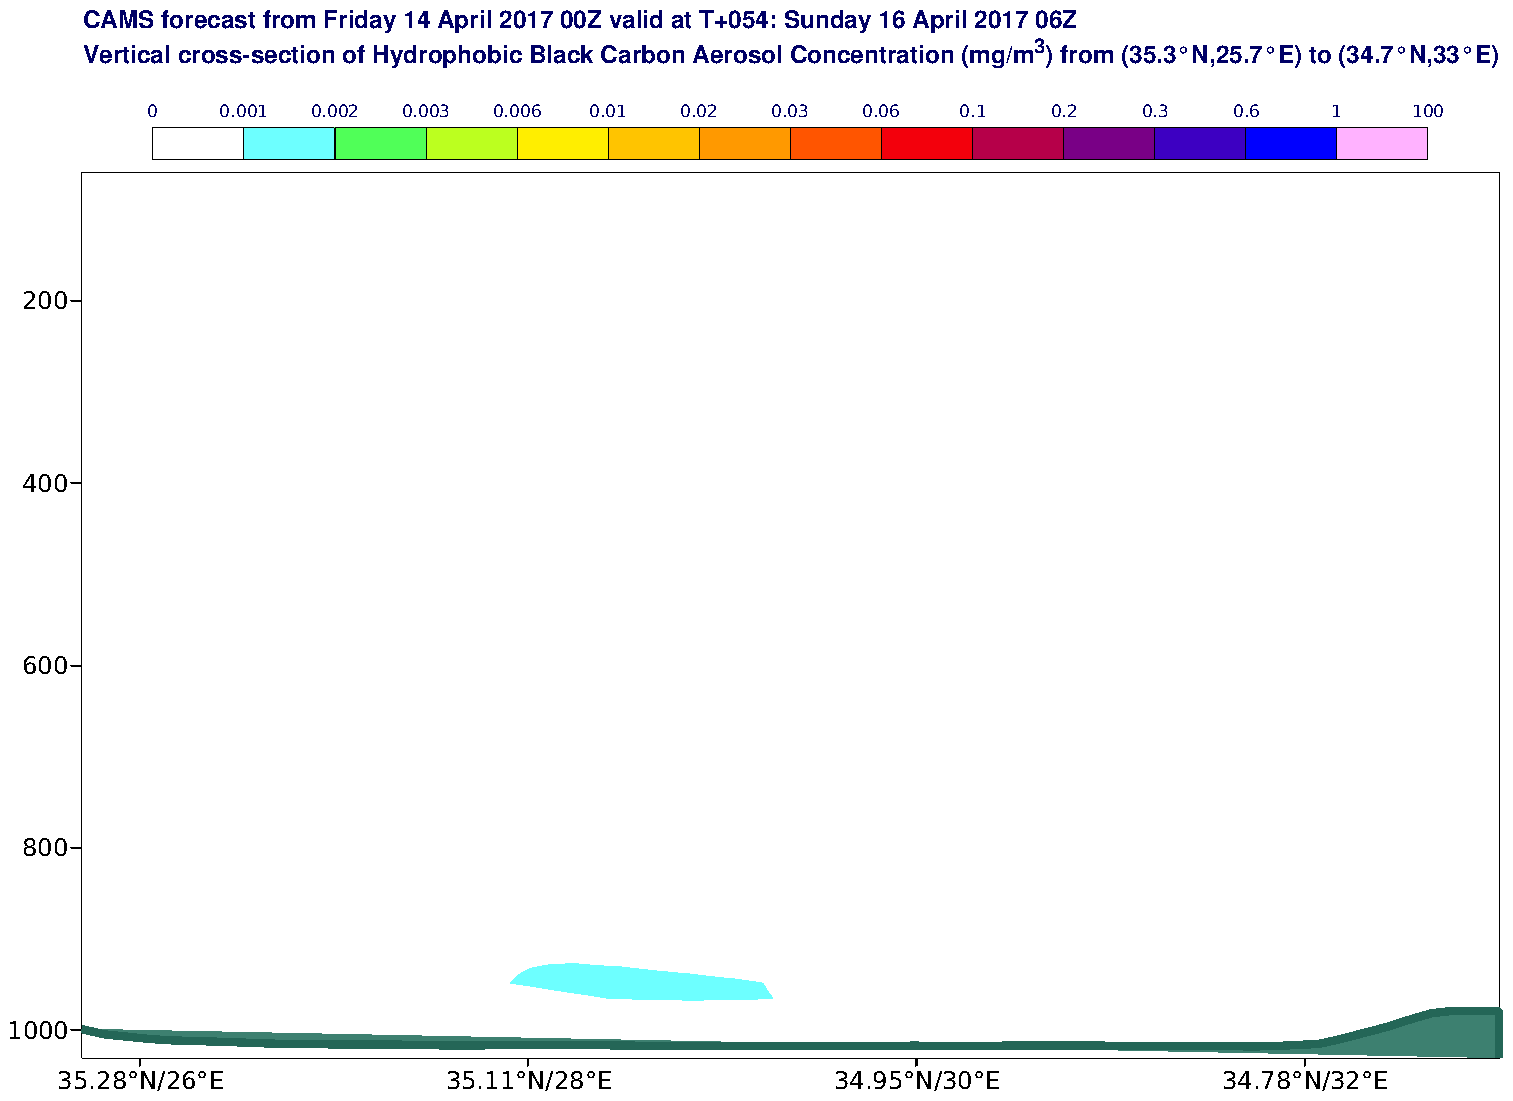 Vertical cross-section of Hydrophobic Black Carbon Aerosol Concentration (mg/m3) valid at T54 - 2017-04-16 06:00